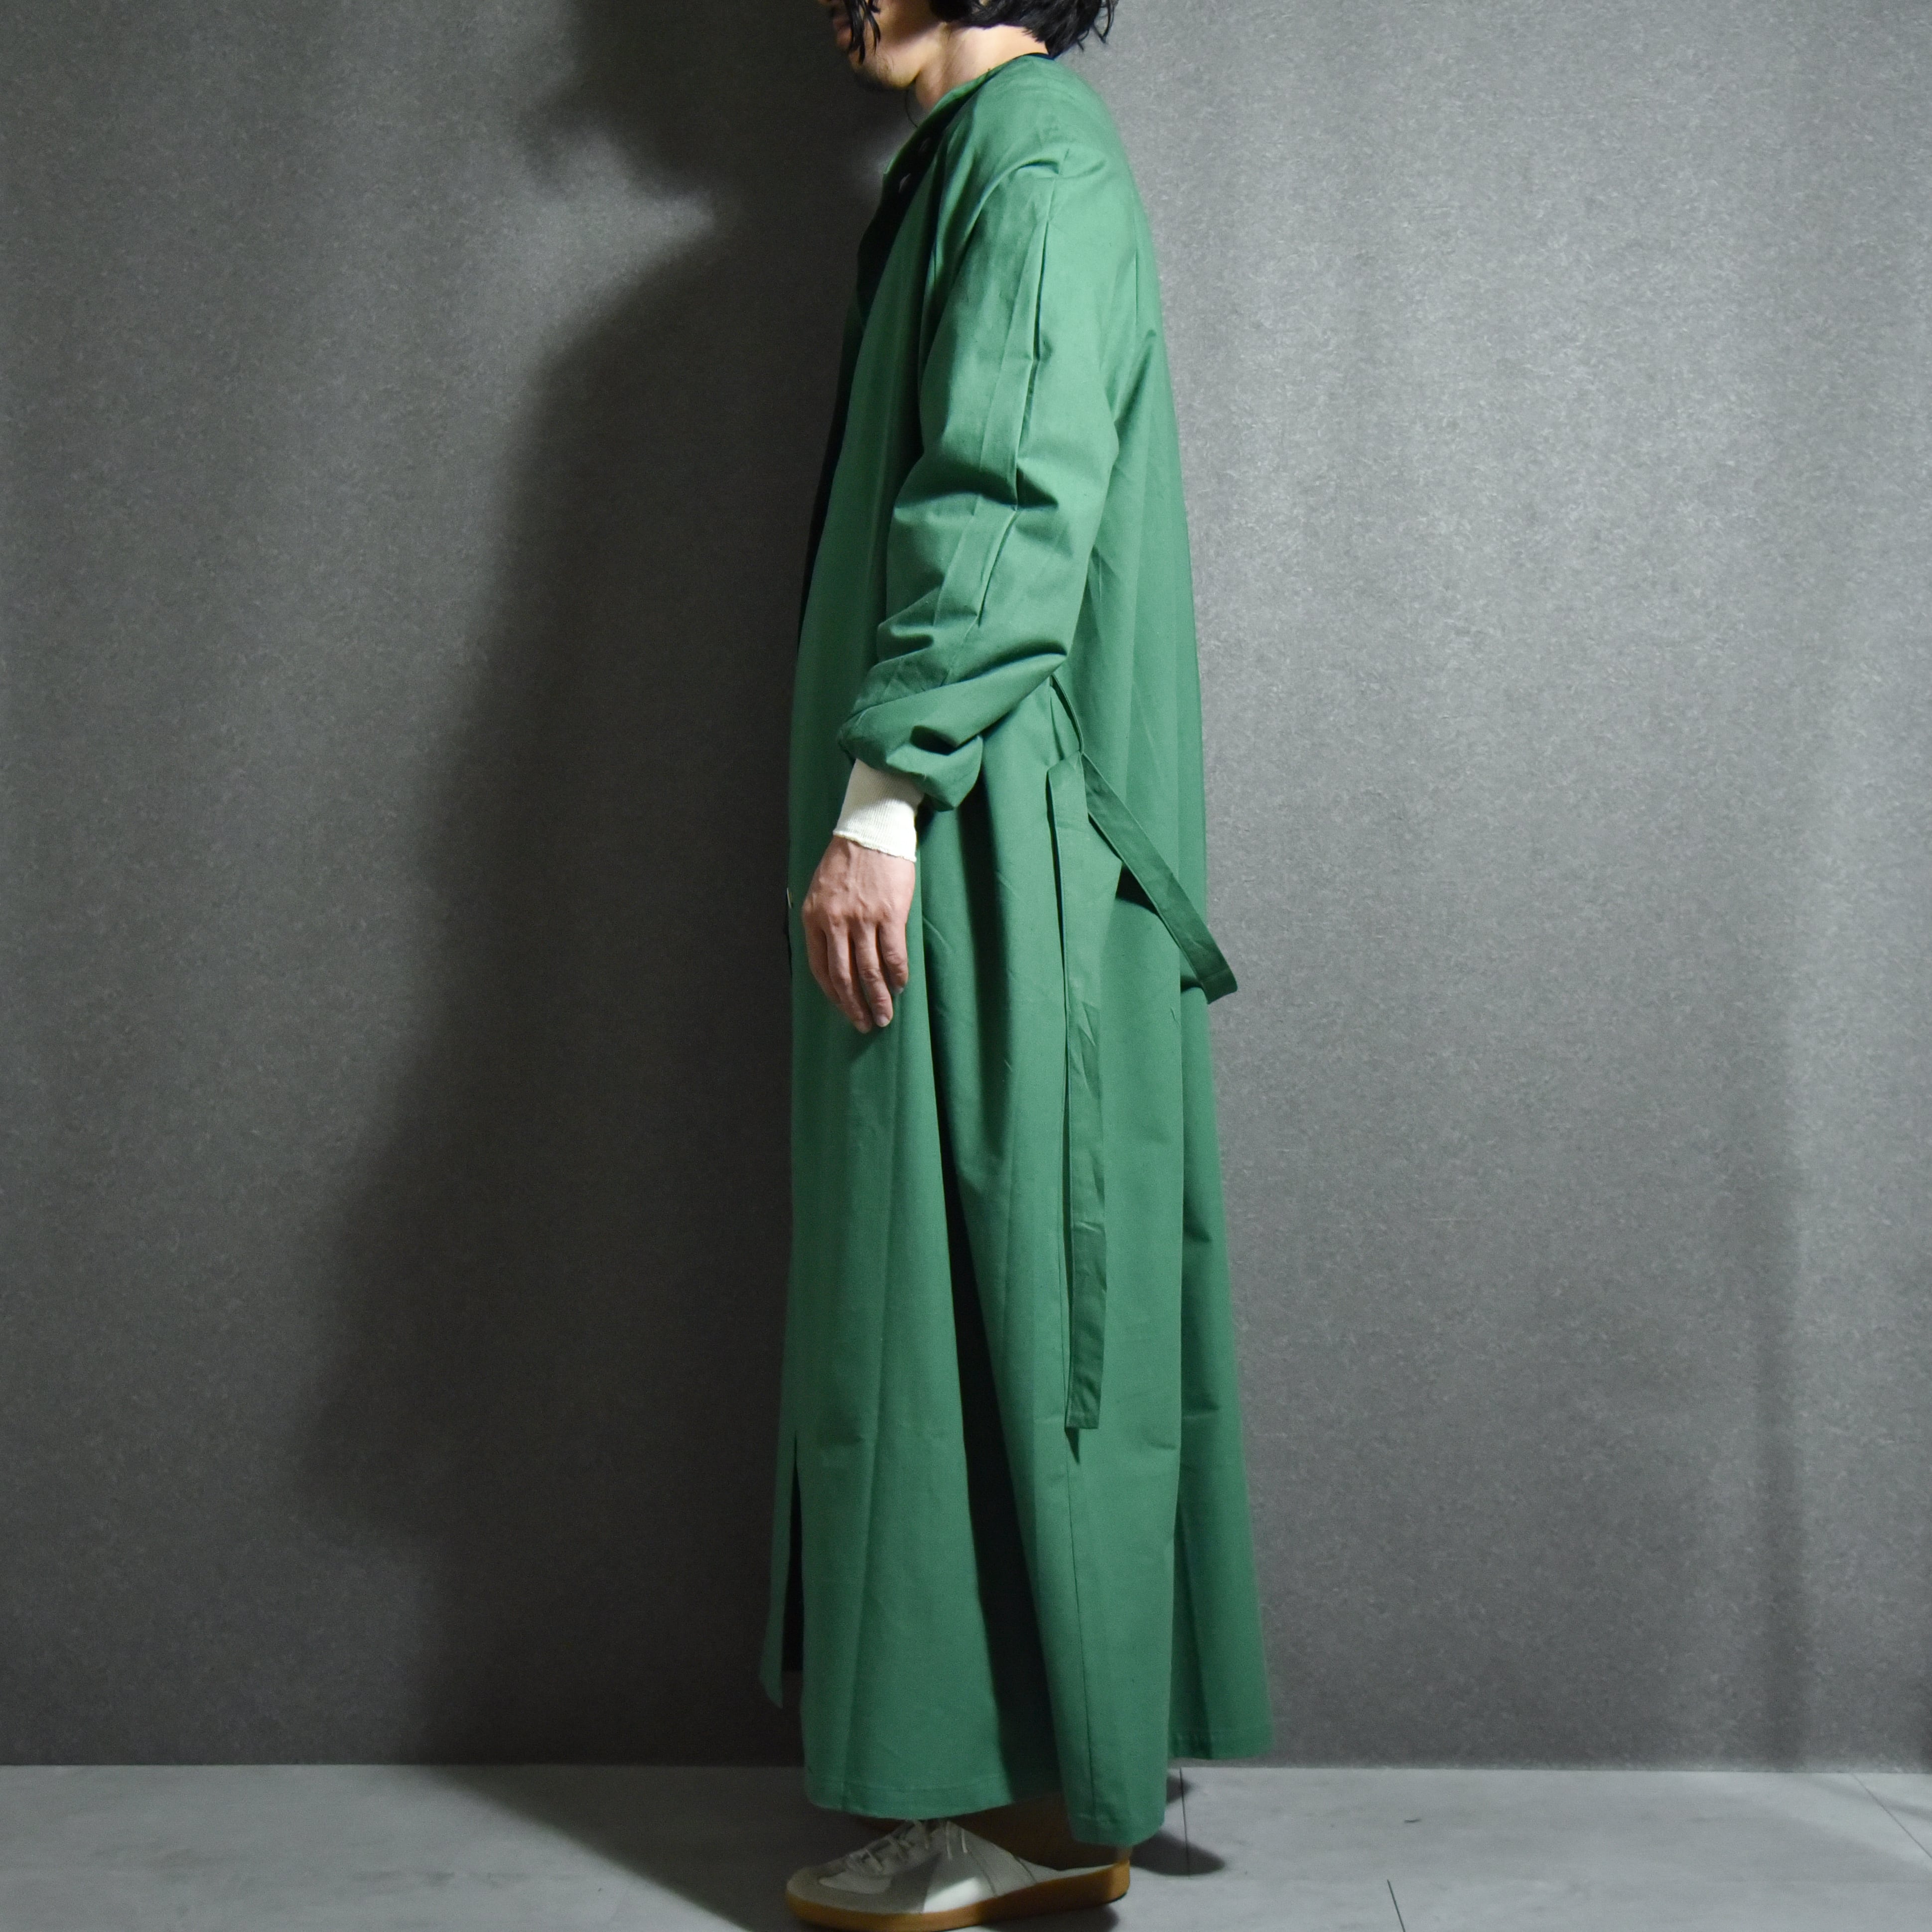 DEAD STOCK】Swedish Army Surgical Gown スウェーデン軍 サージカル